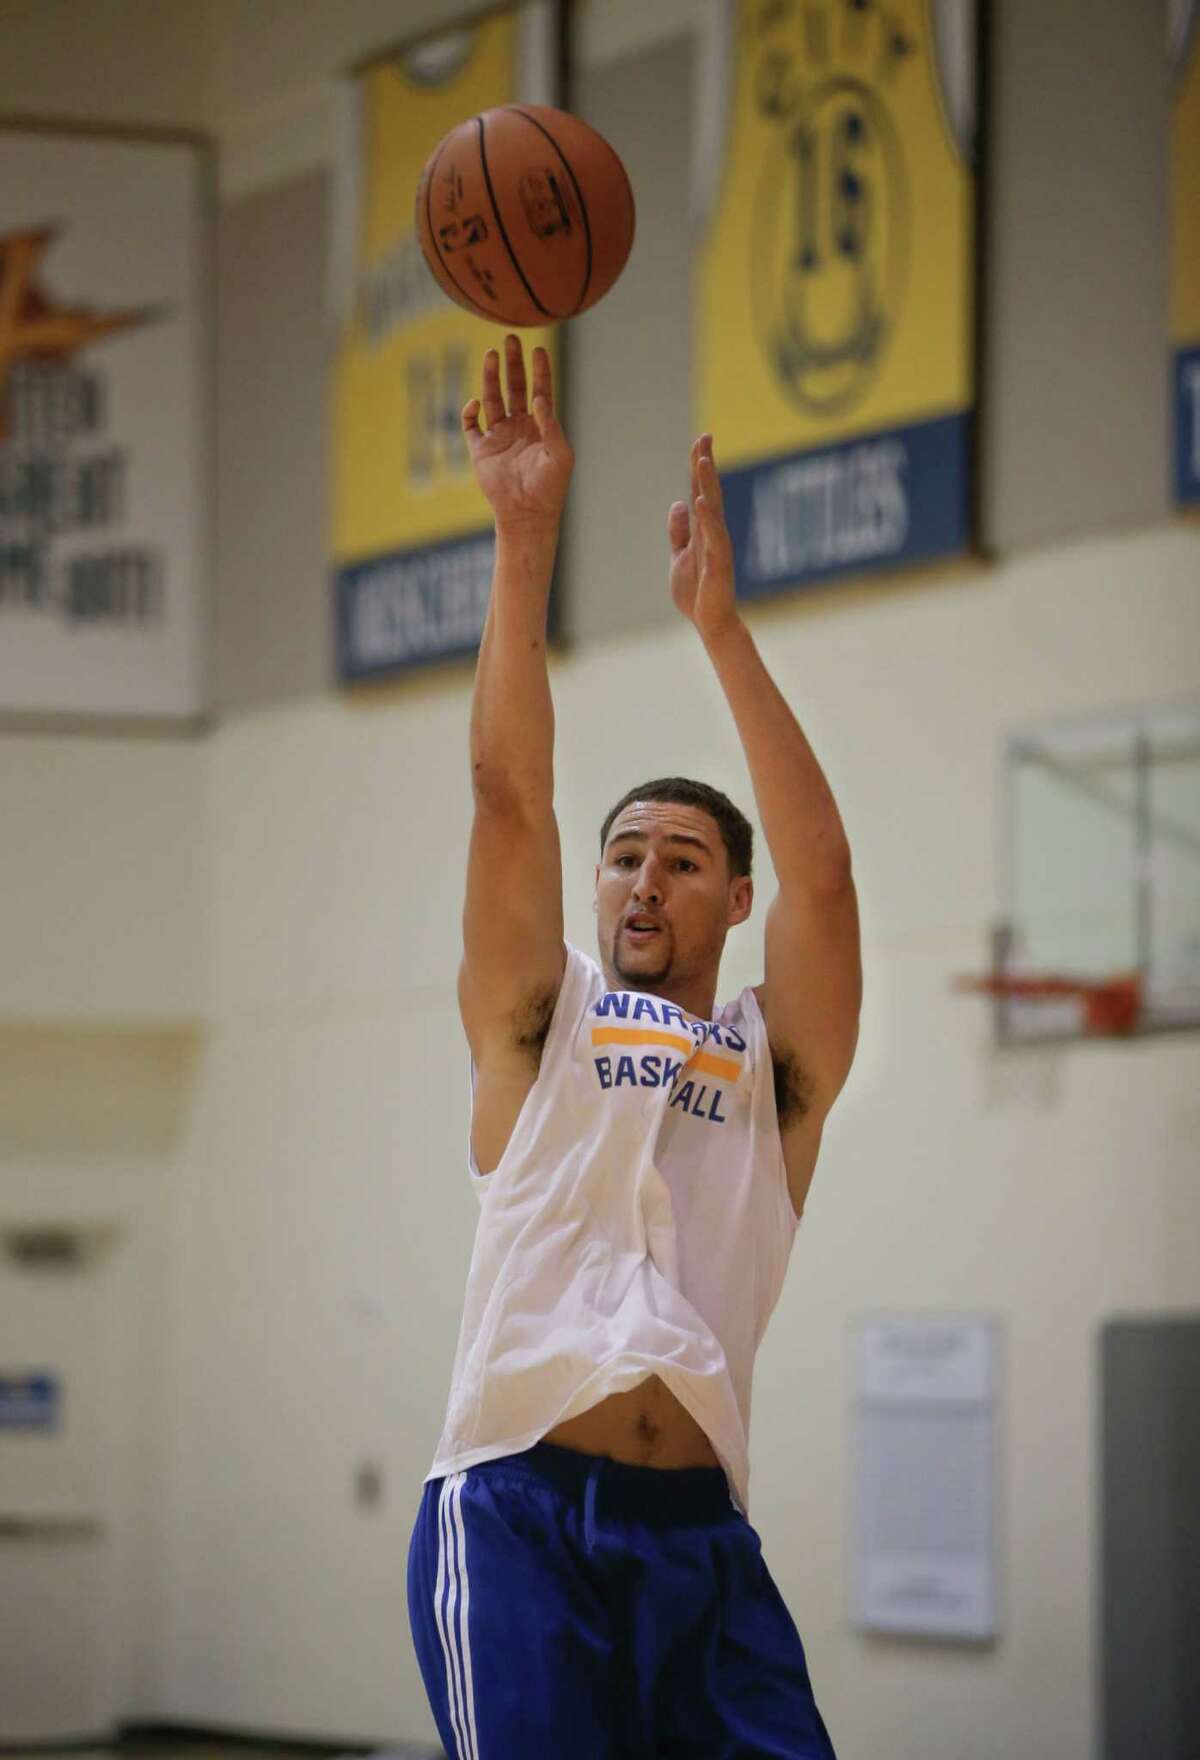 OAKLAND, CA - SEPTEMBER 22: Klay Thompson appears at the Golden